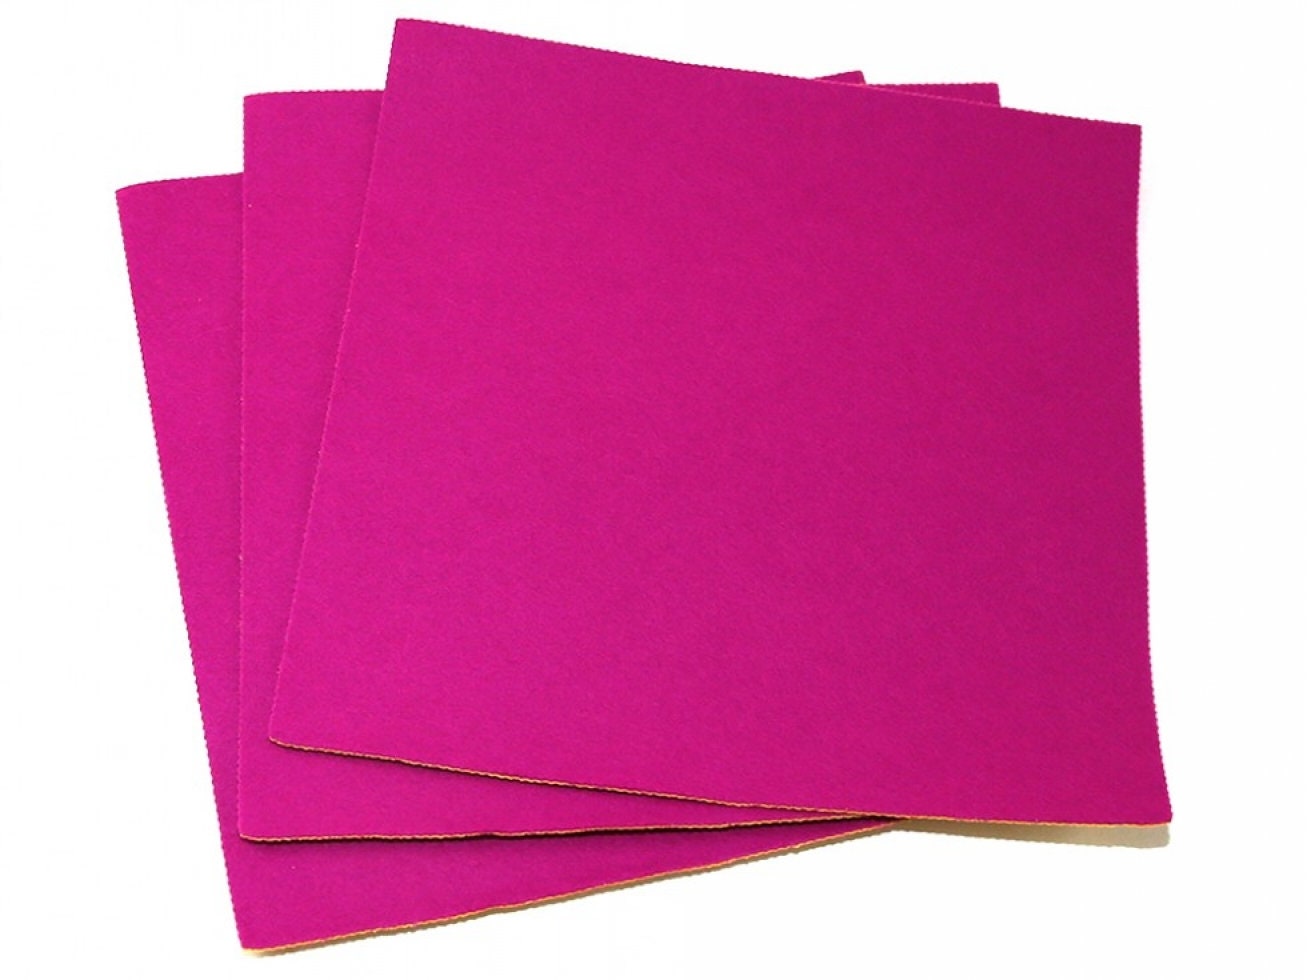 Self Adhesive Sticky Backed Felt Baize Craft Fabric Material Heather 